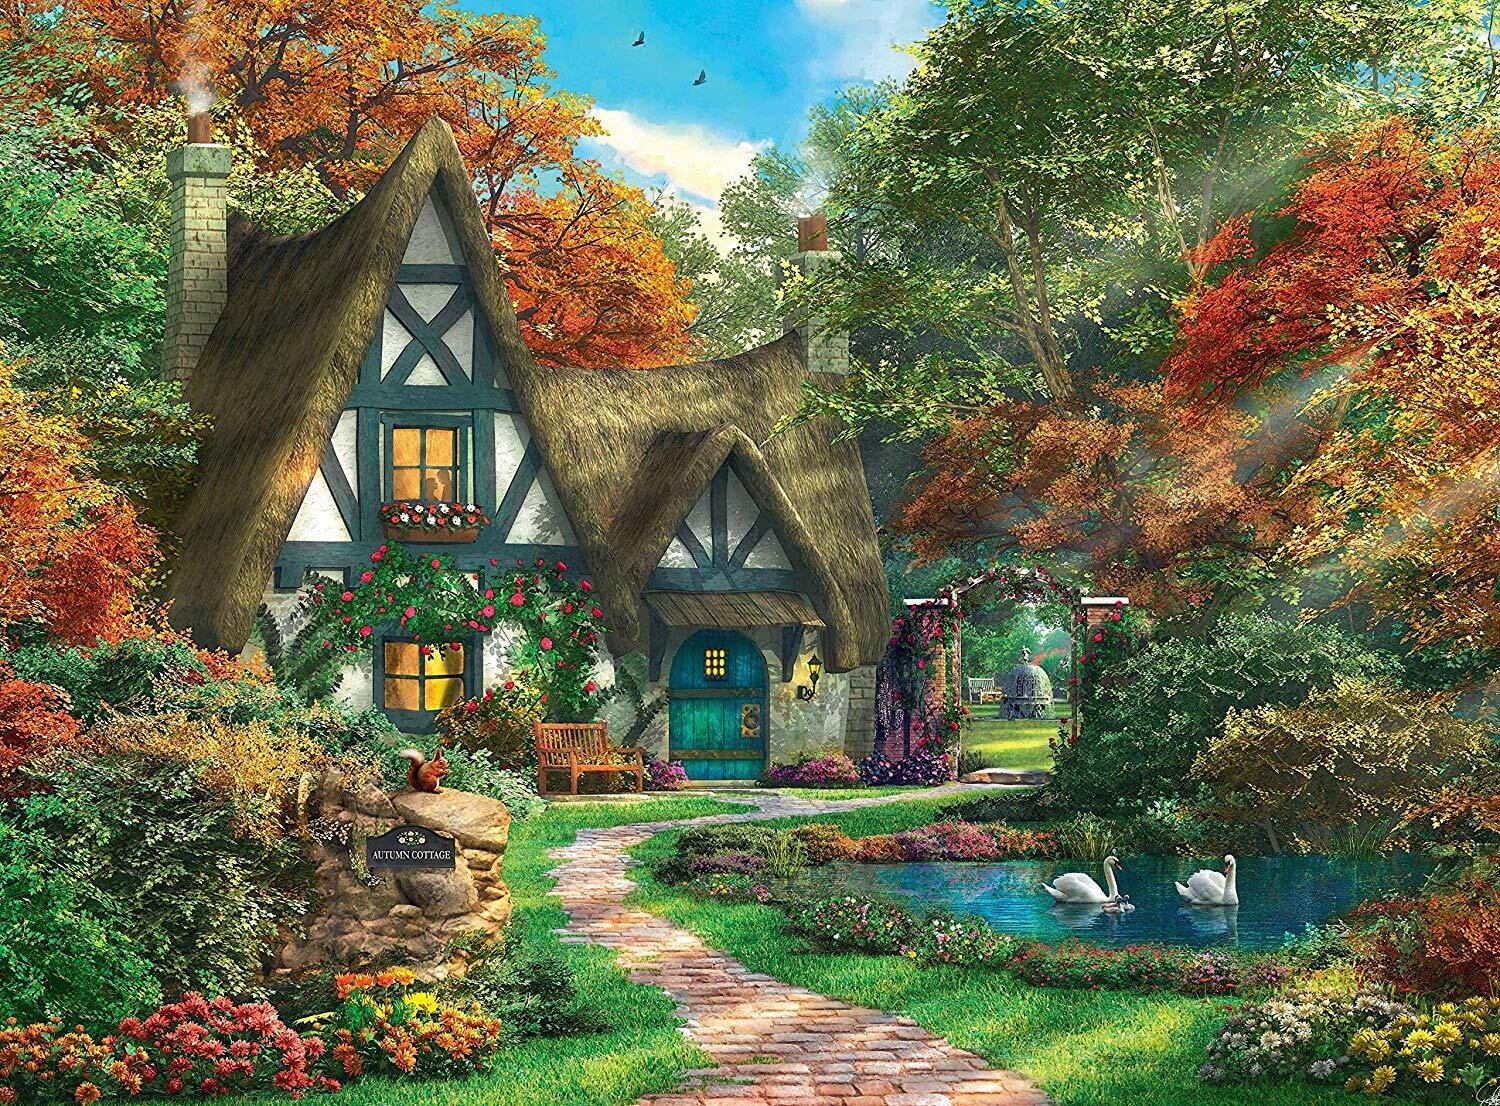 Brand New Ravensburger 500 Piece Jigsaw Puzzle COTTAGE IN AUTUMN 